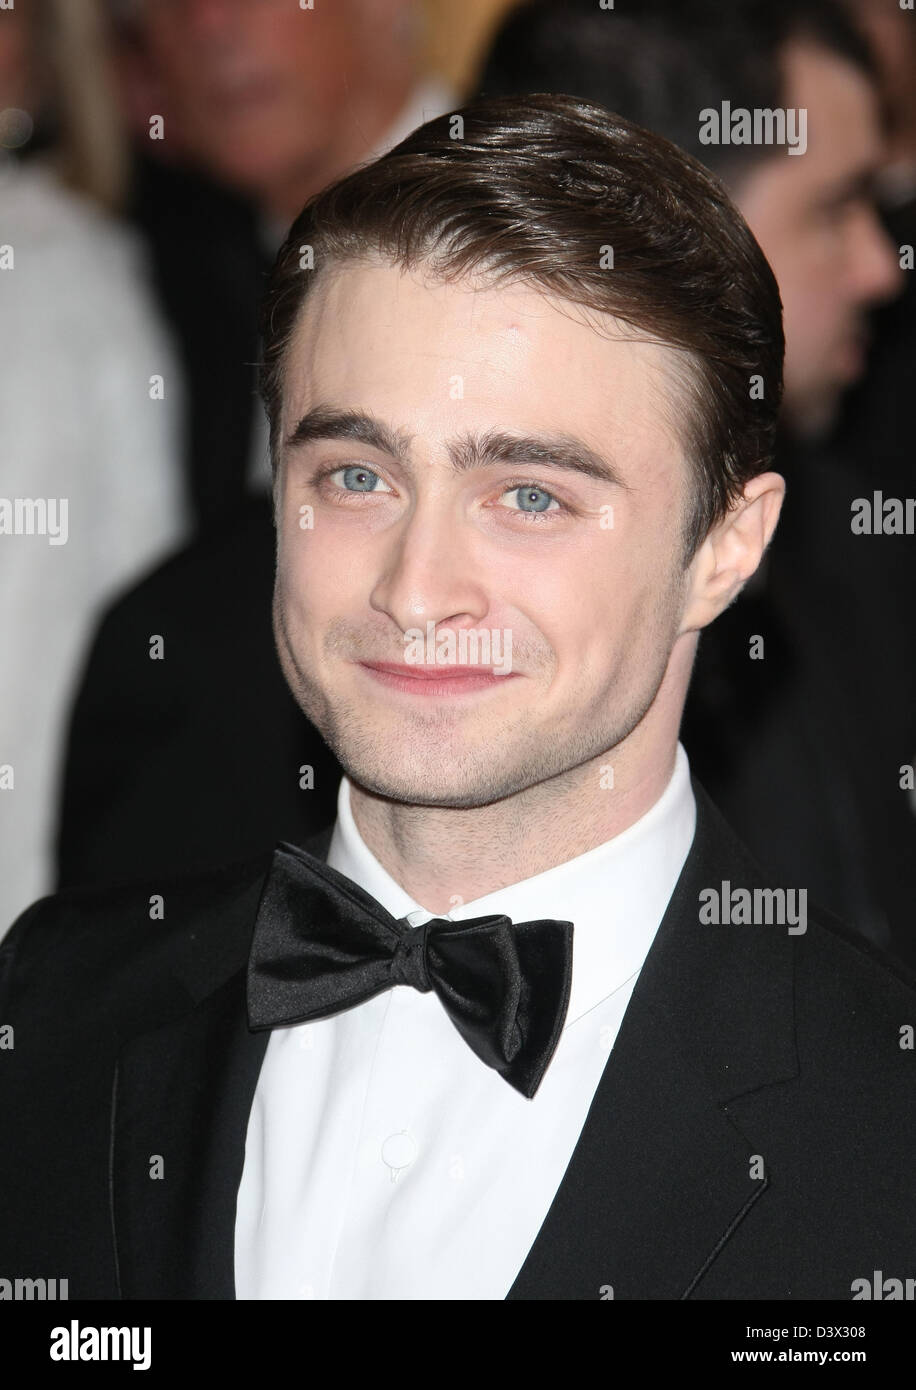 DANIEL RADCLIFFE 85TH ACADEMY AWARDS ARRIVALS DOLBY THEATRE LOS ANGELES CALIFORNIA USA 24 February 2013 Stock Photo